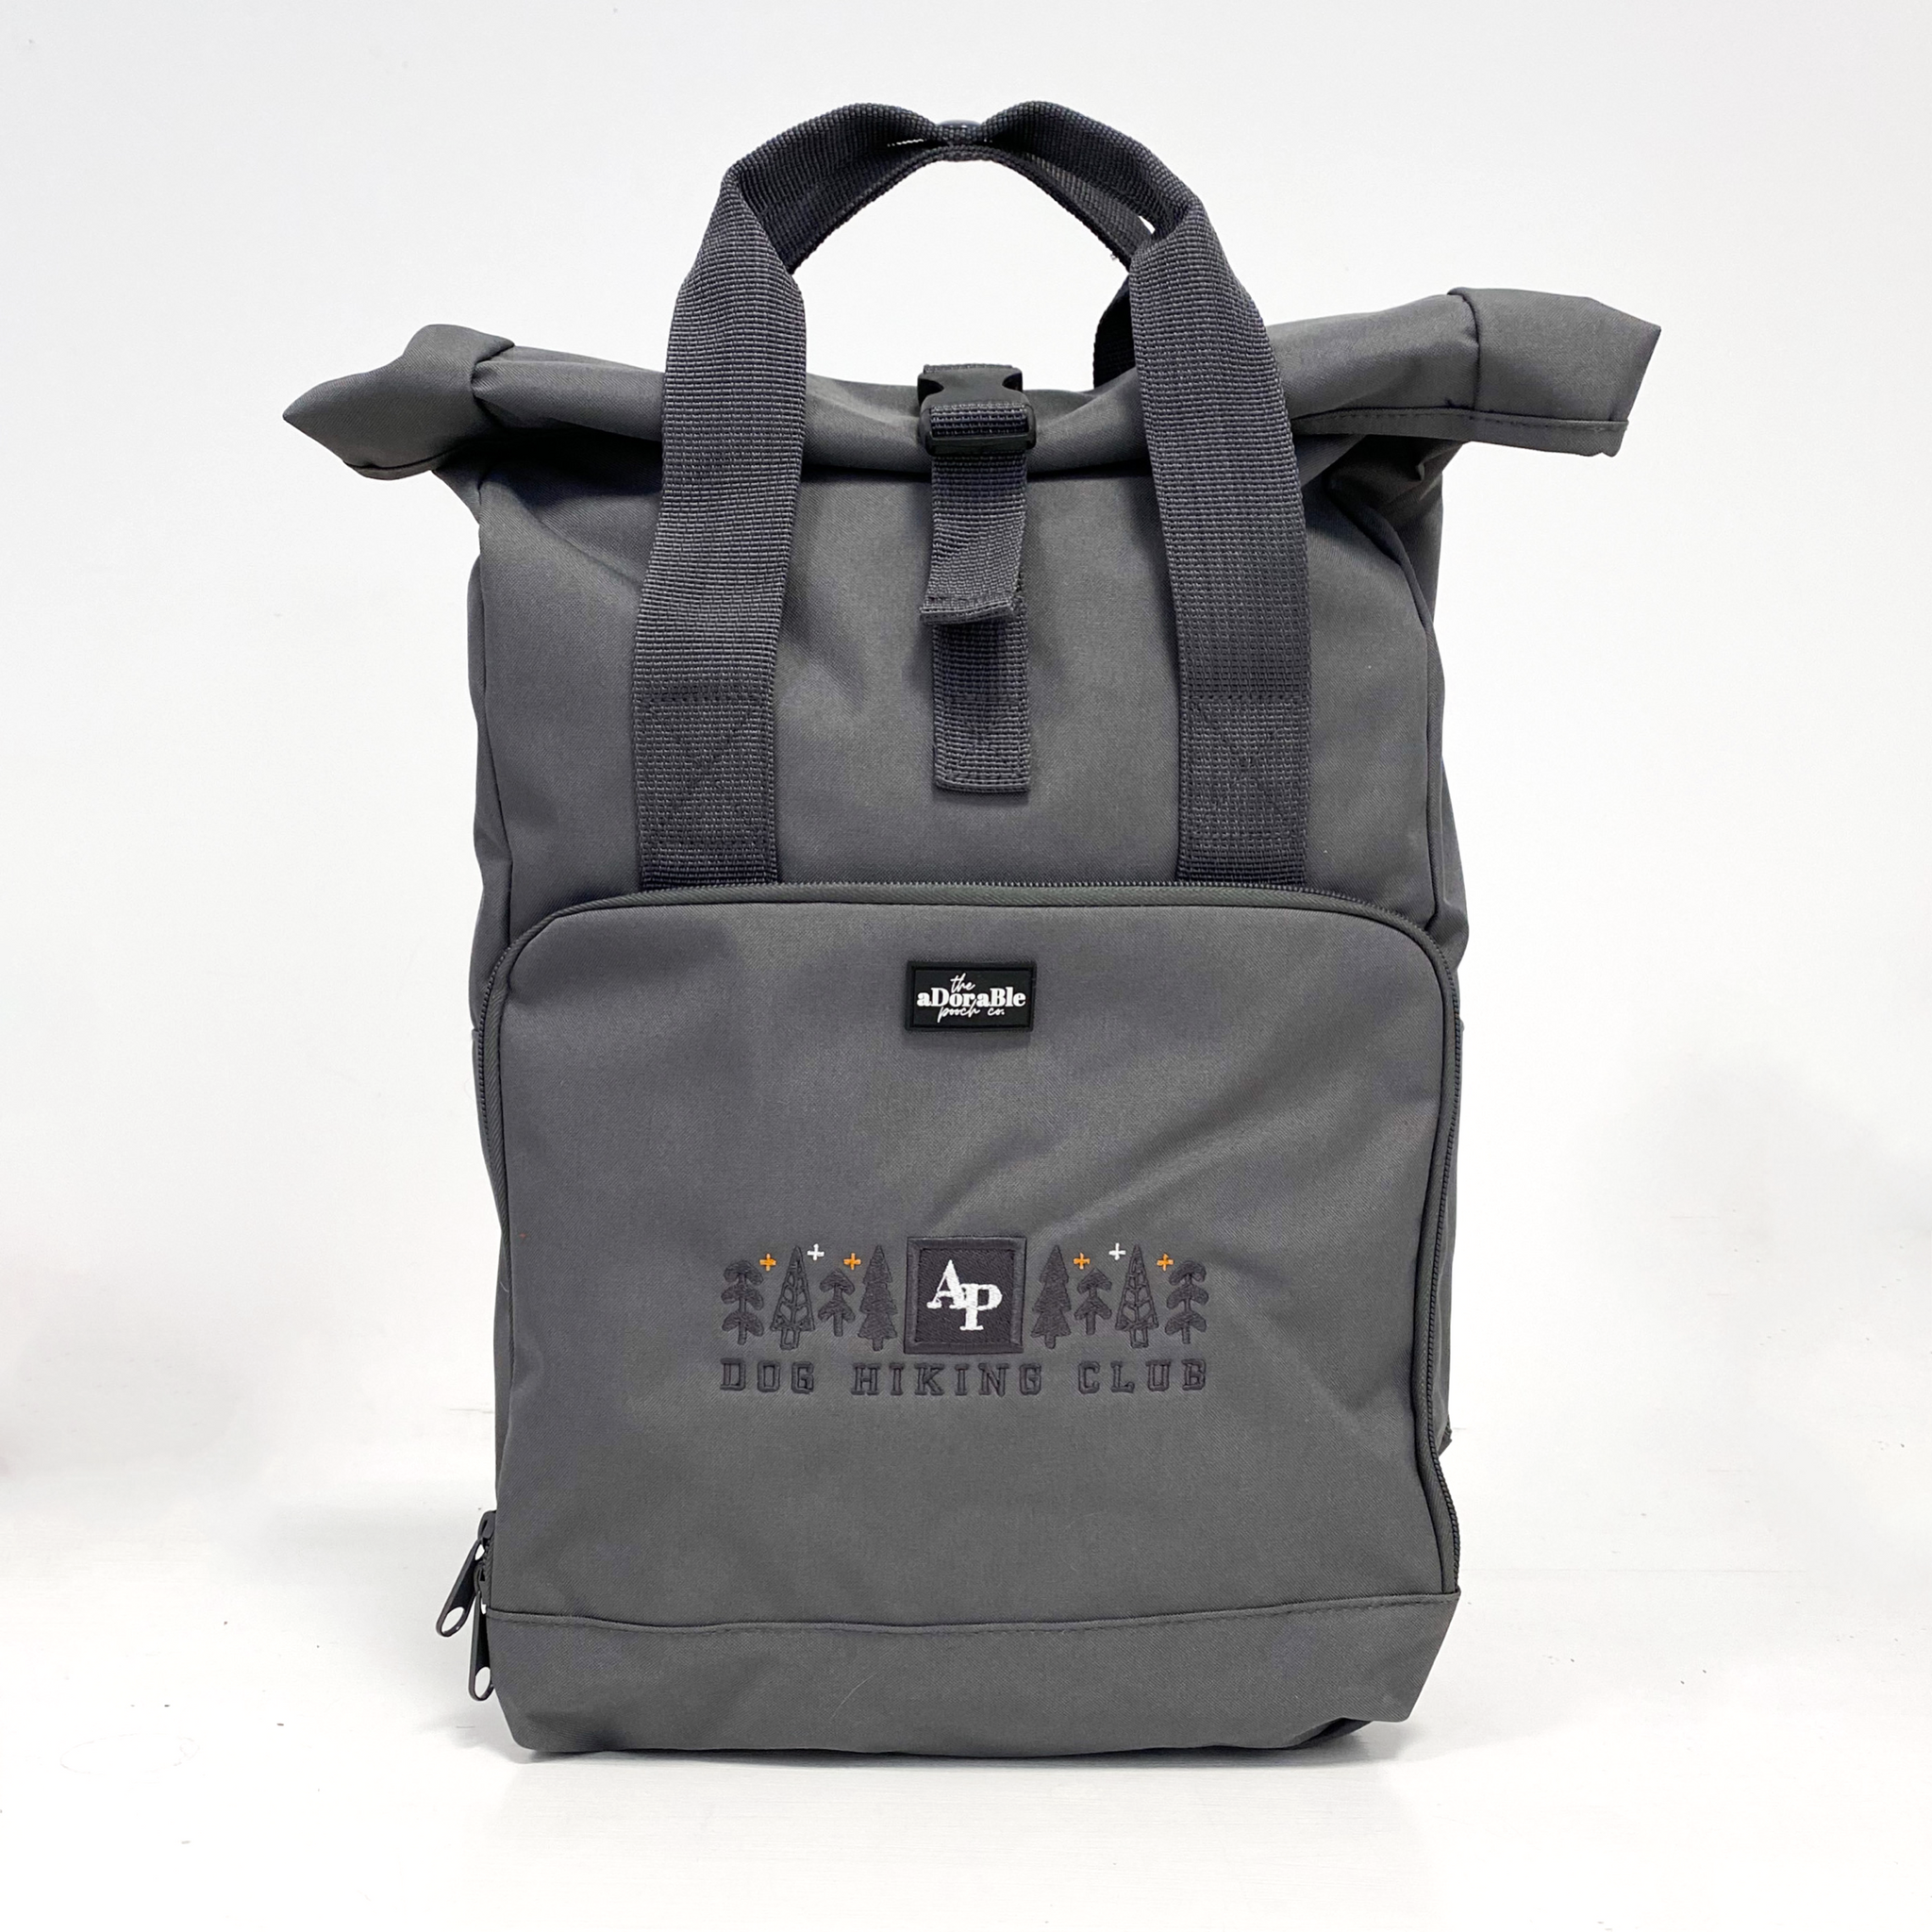 Backpack - AP Dog Hiking Club - Midnight Forest